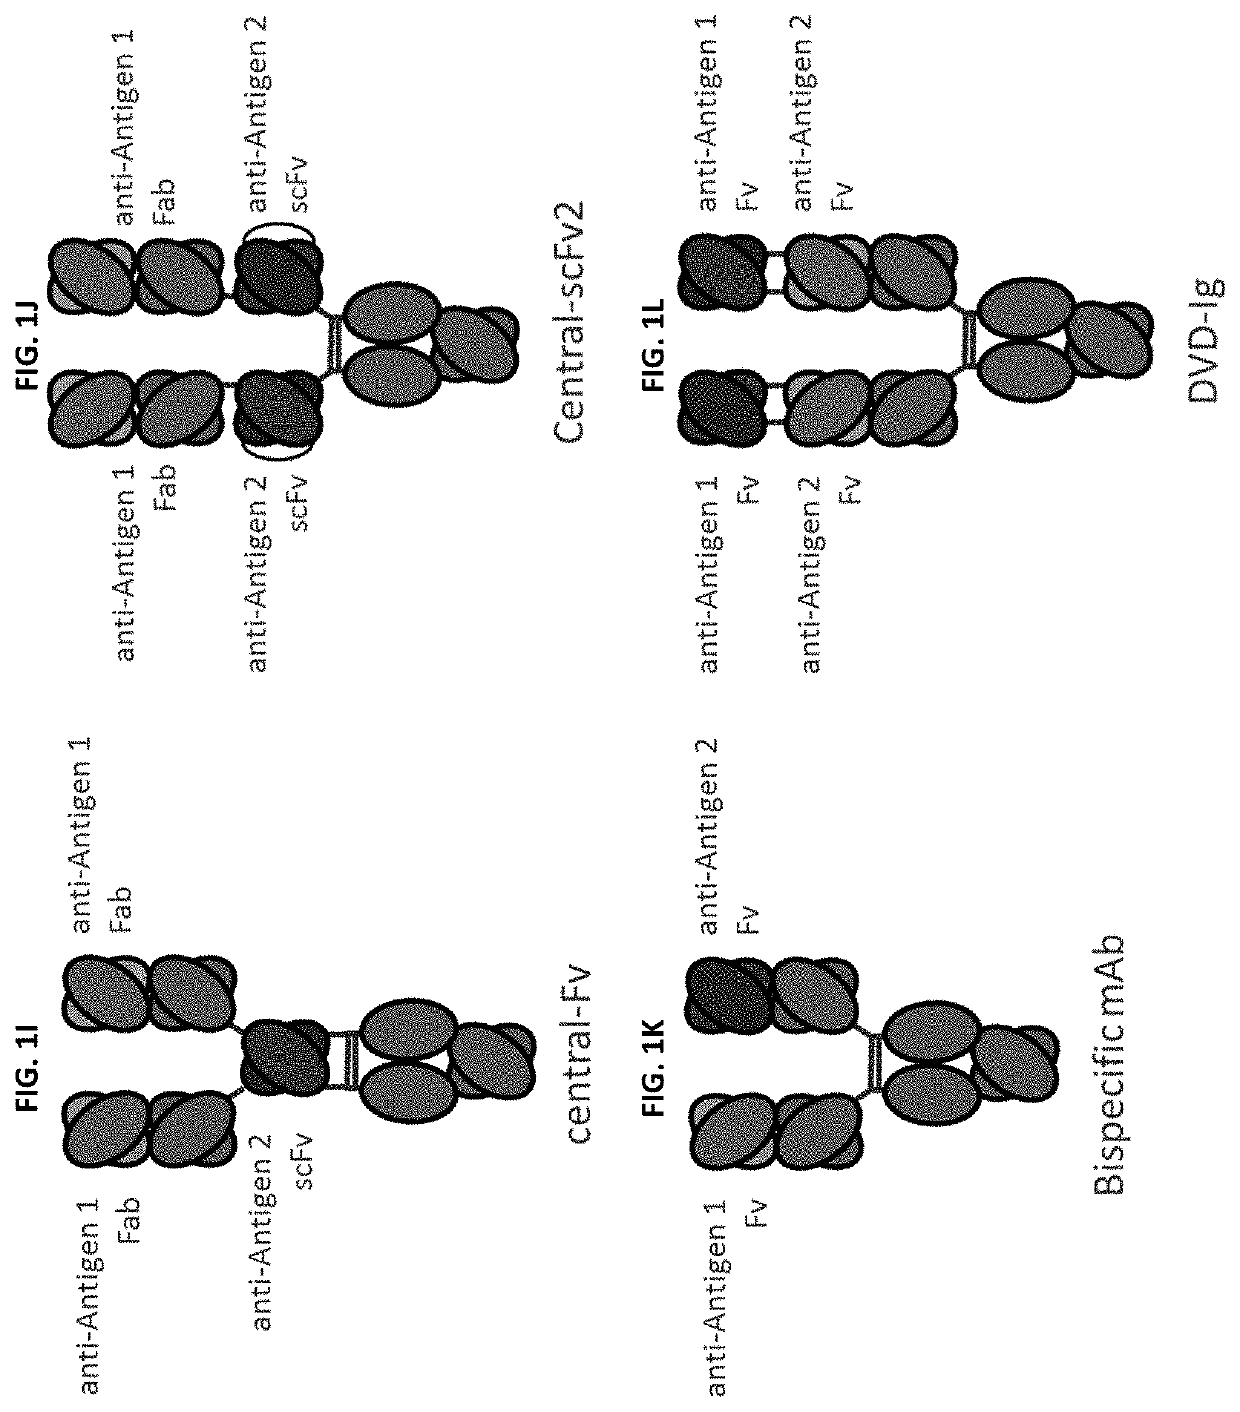 Bispecific and monospecific antibodies using novel anti-PD-1 sequences